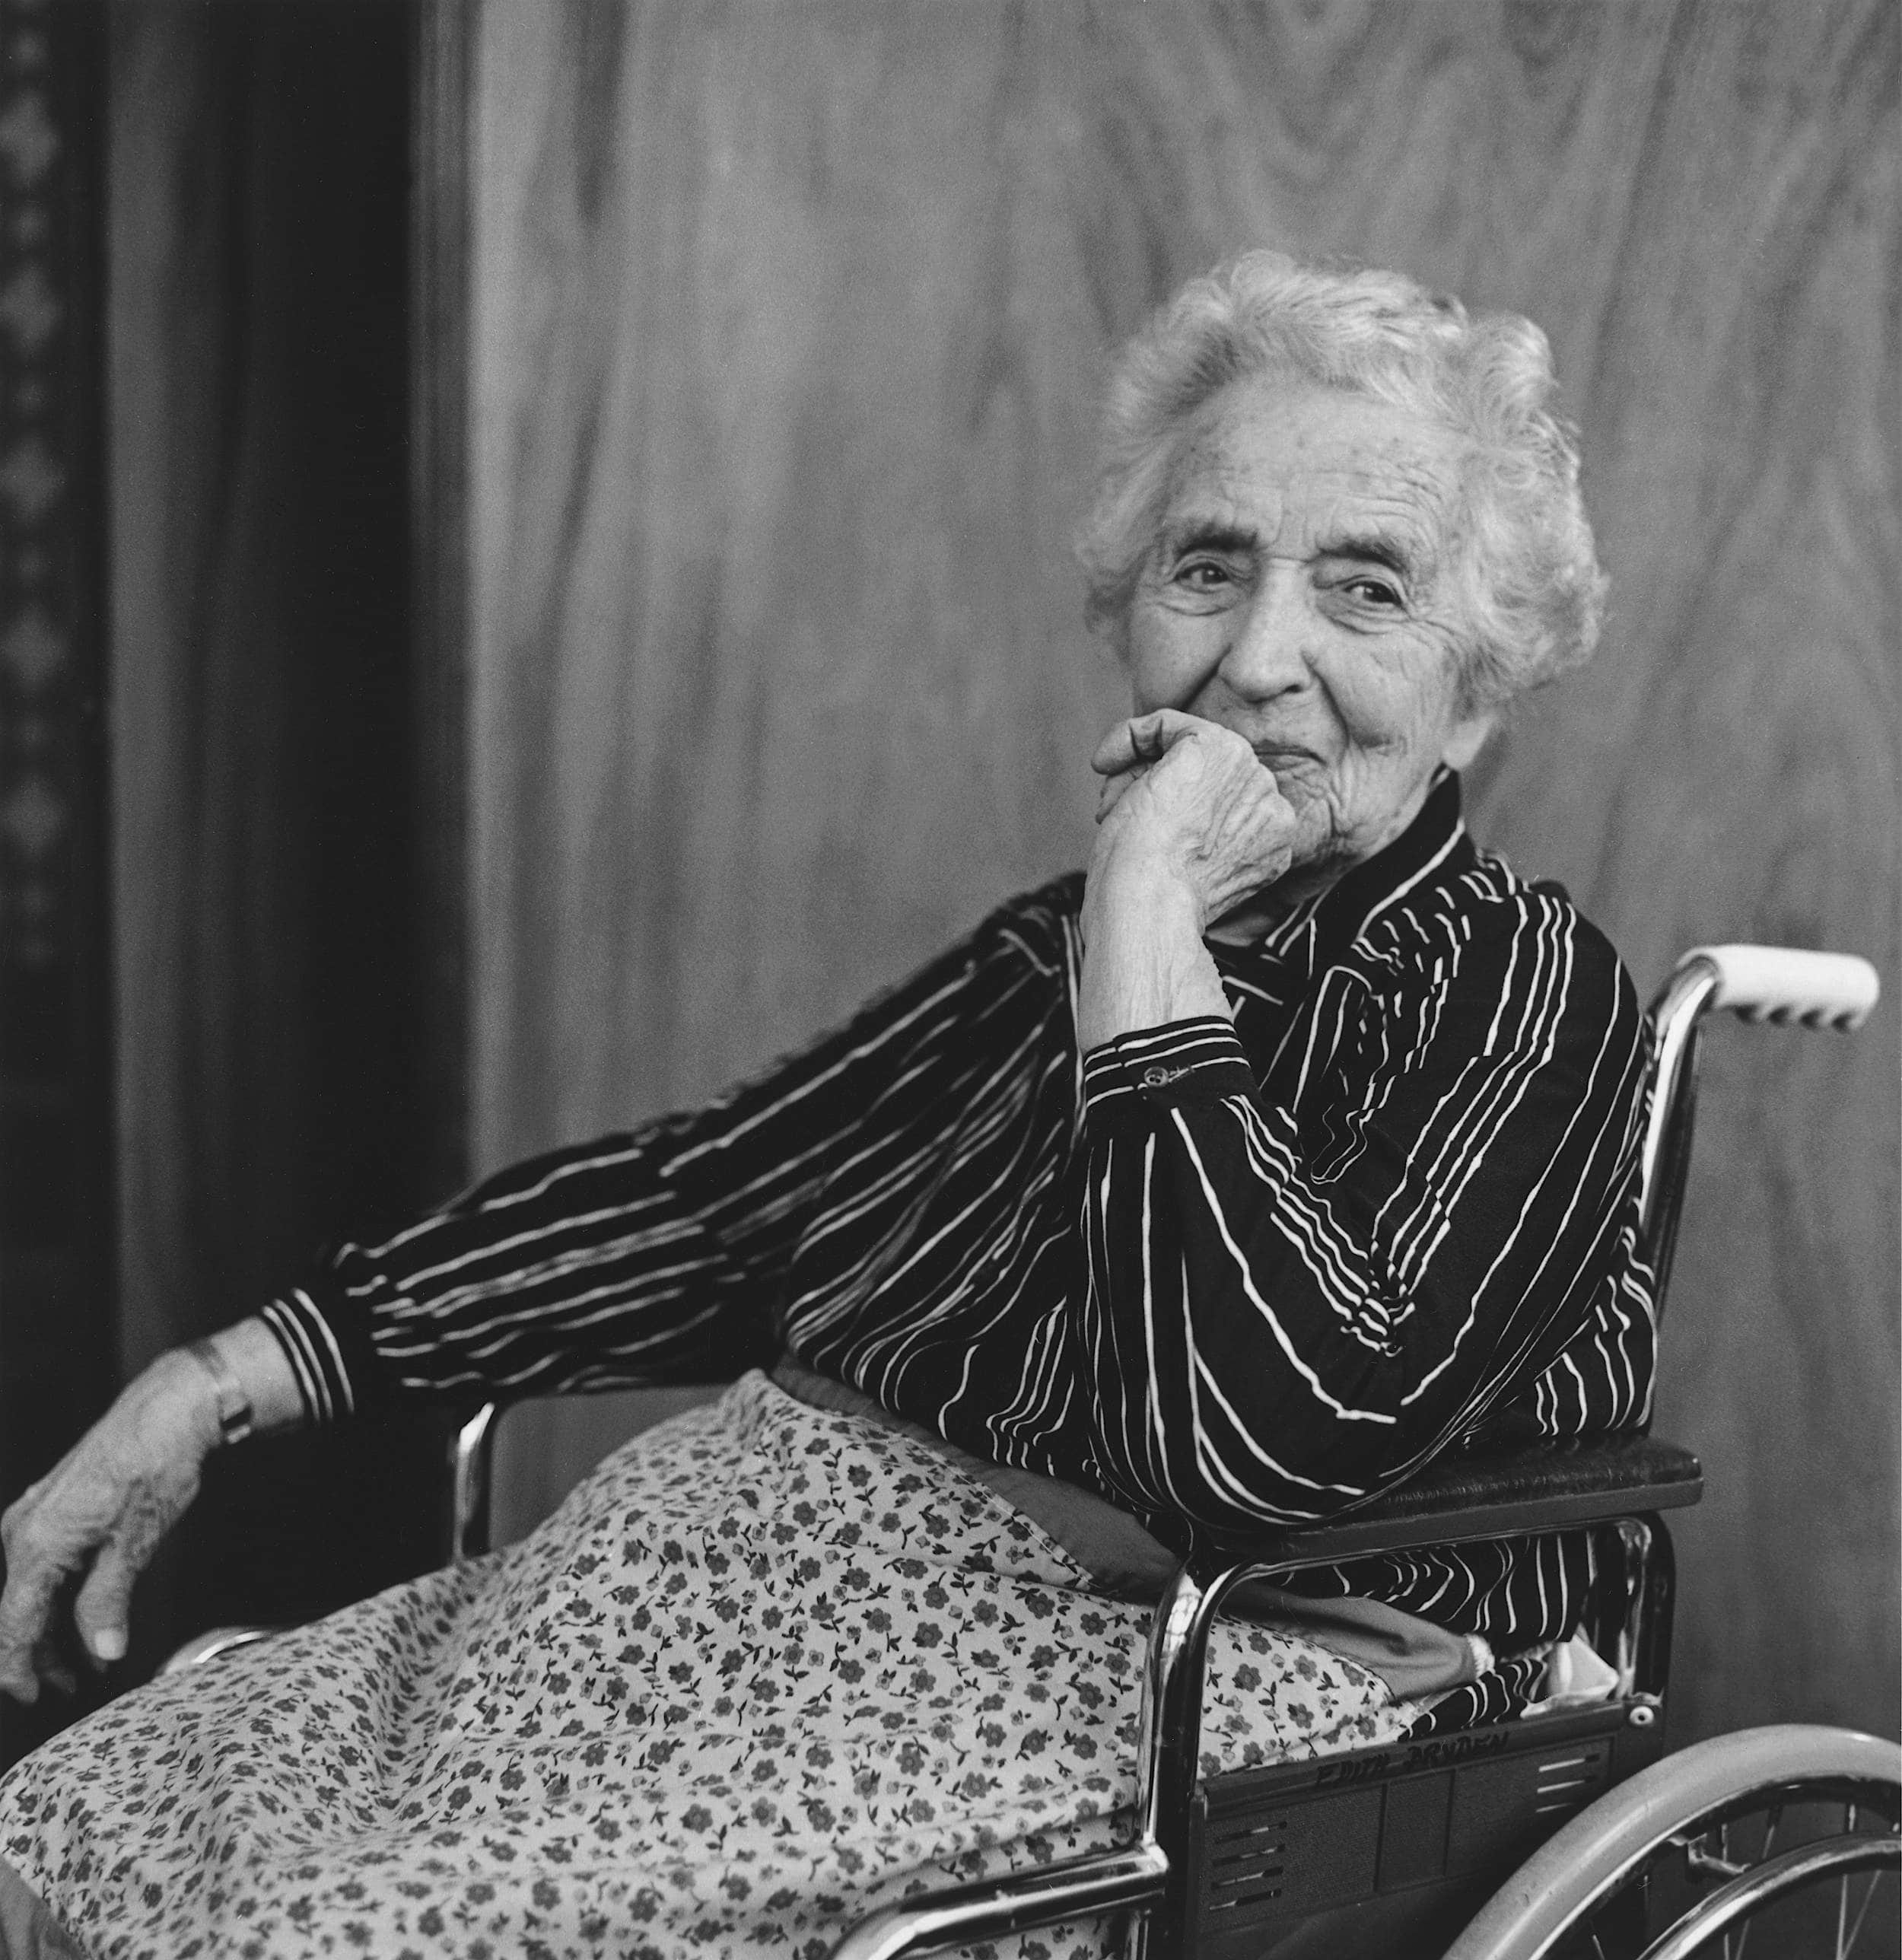 Black and white photo of elderly woman sitting in wheelchair on an angle with hand resting on chin.